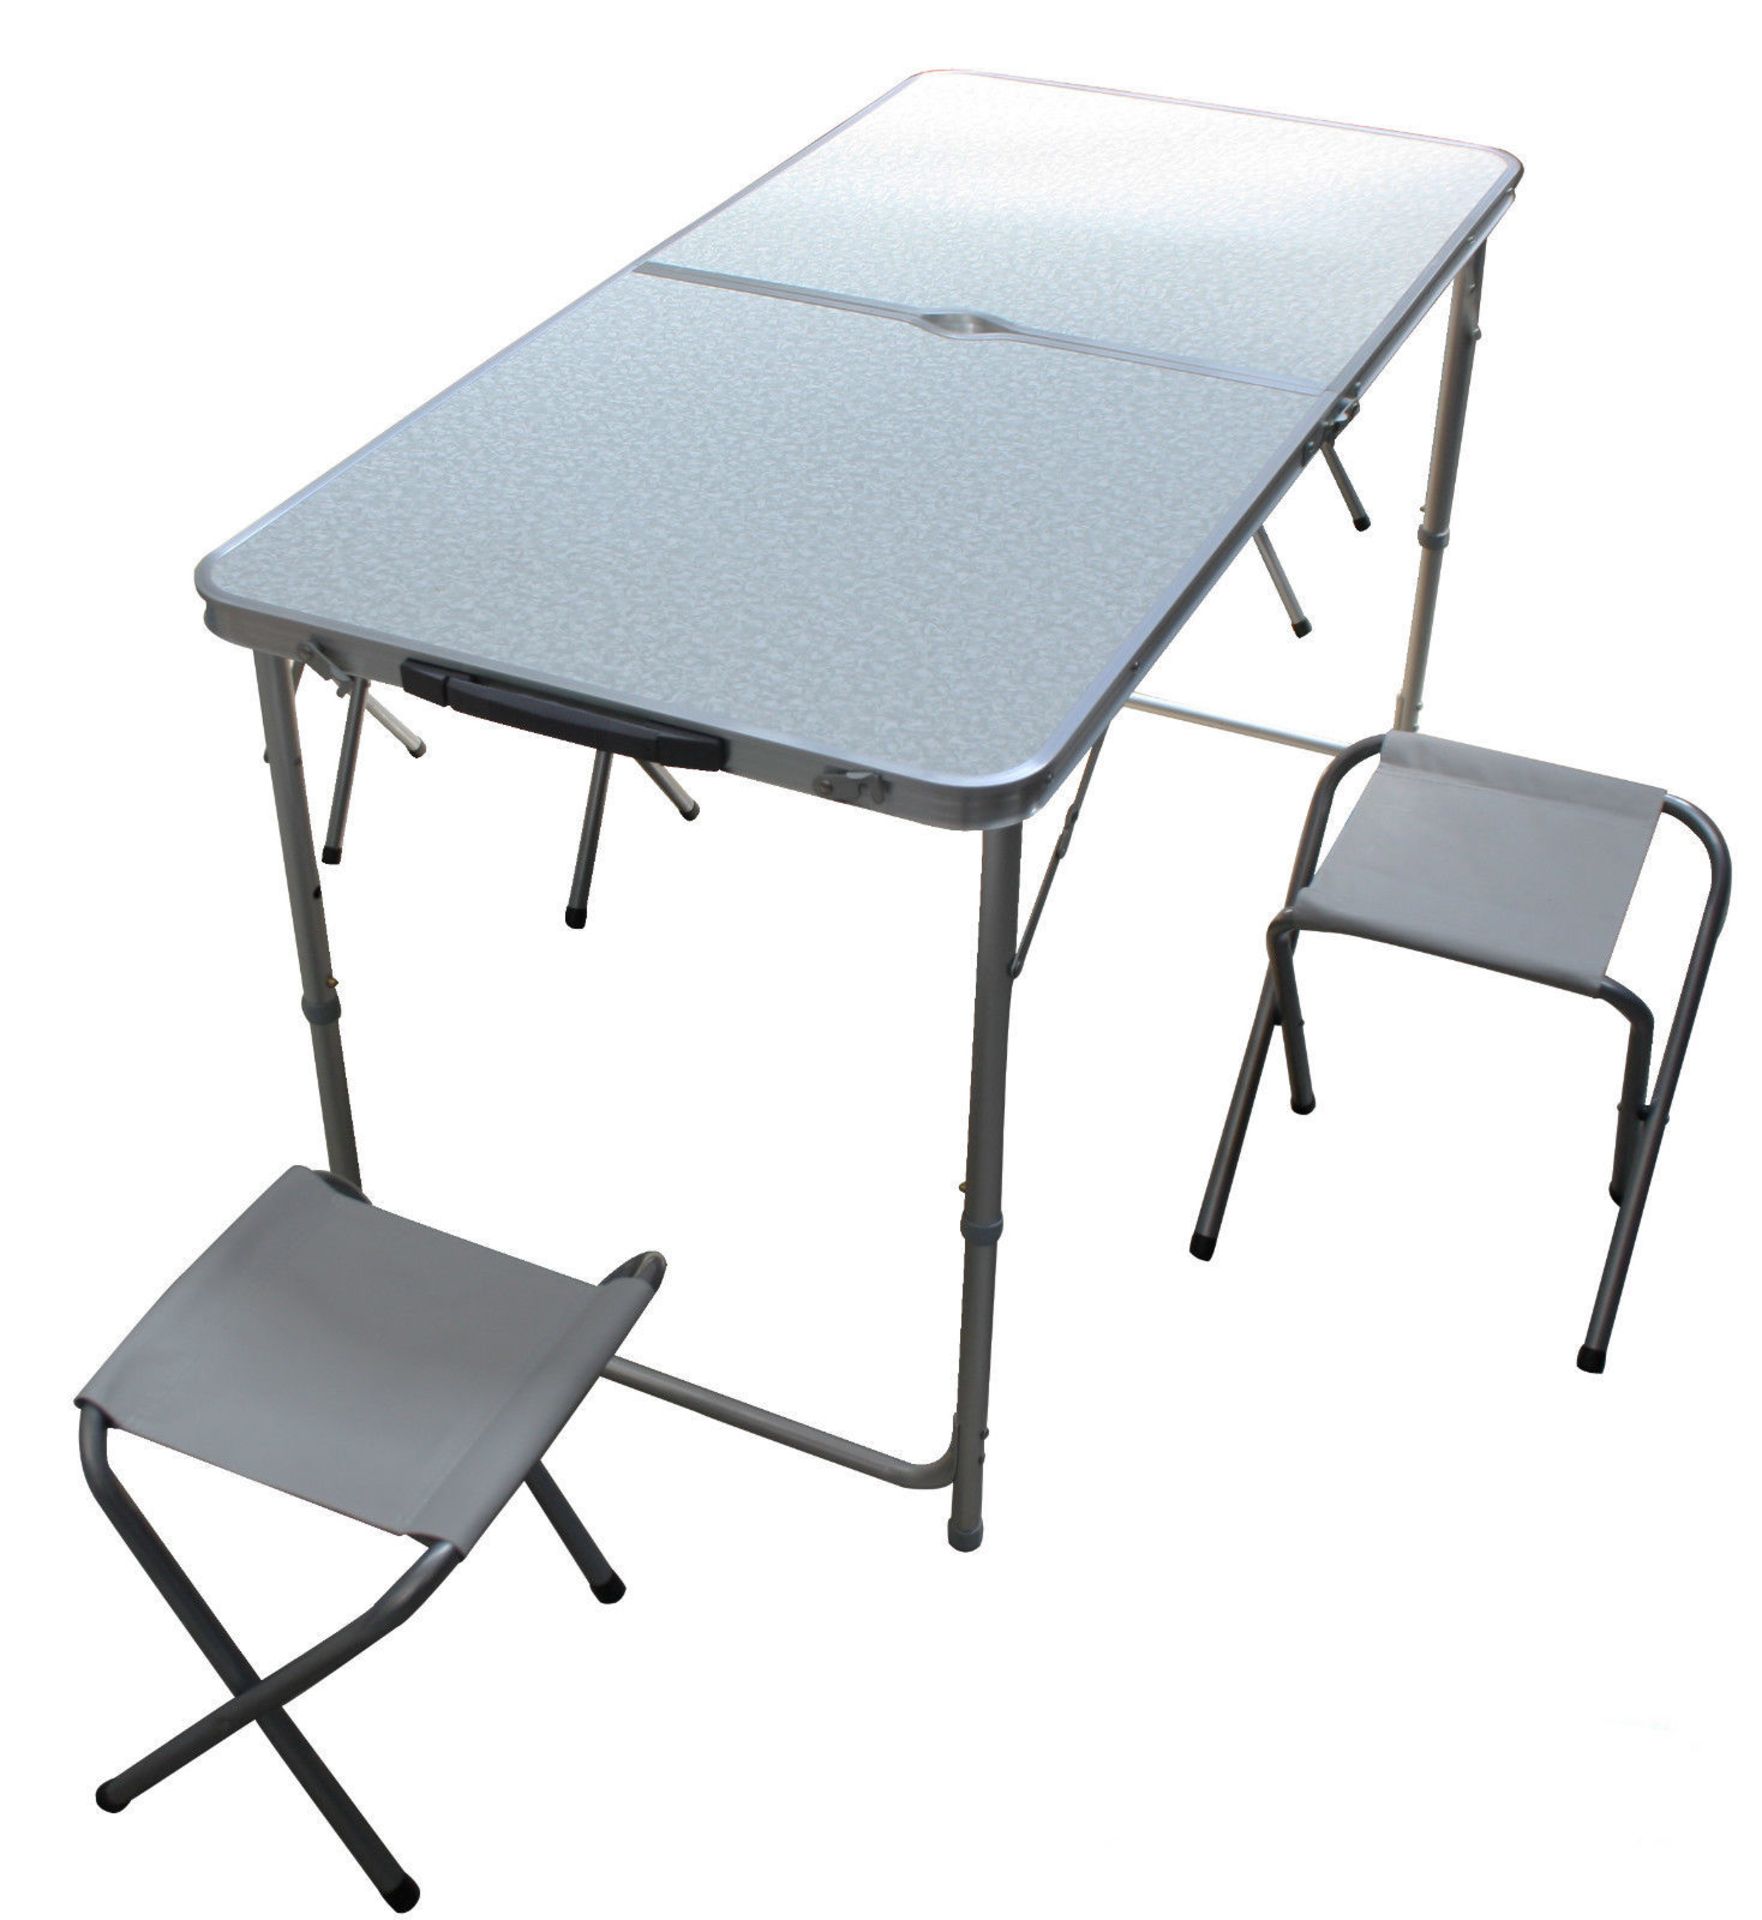 FOLDING ADJUSTABLE PICNIC TABLE WITH 4 STOOLS - QTY: 1 Aluminium legs with MDF top. Size: 120cm x